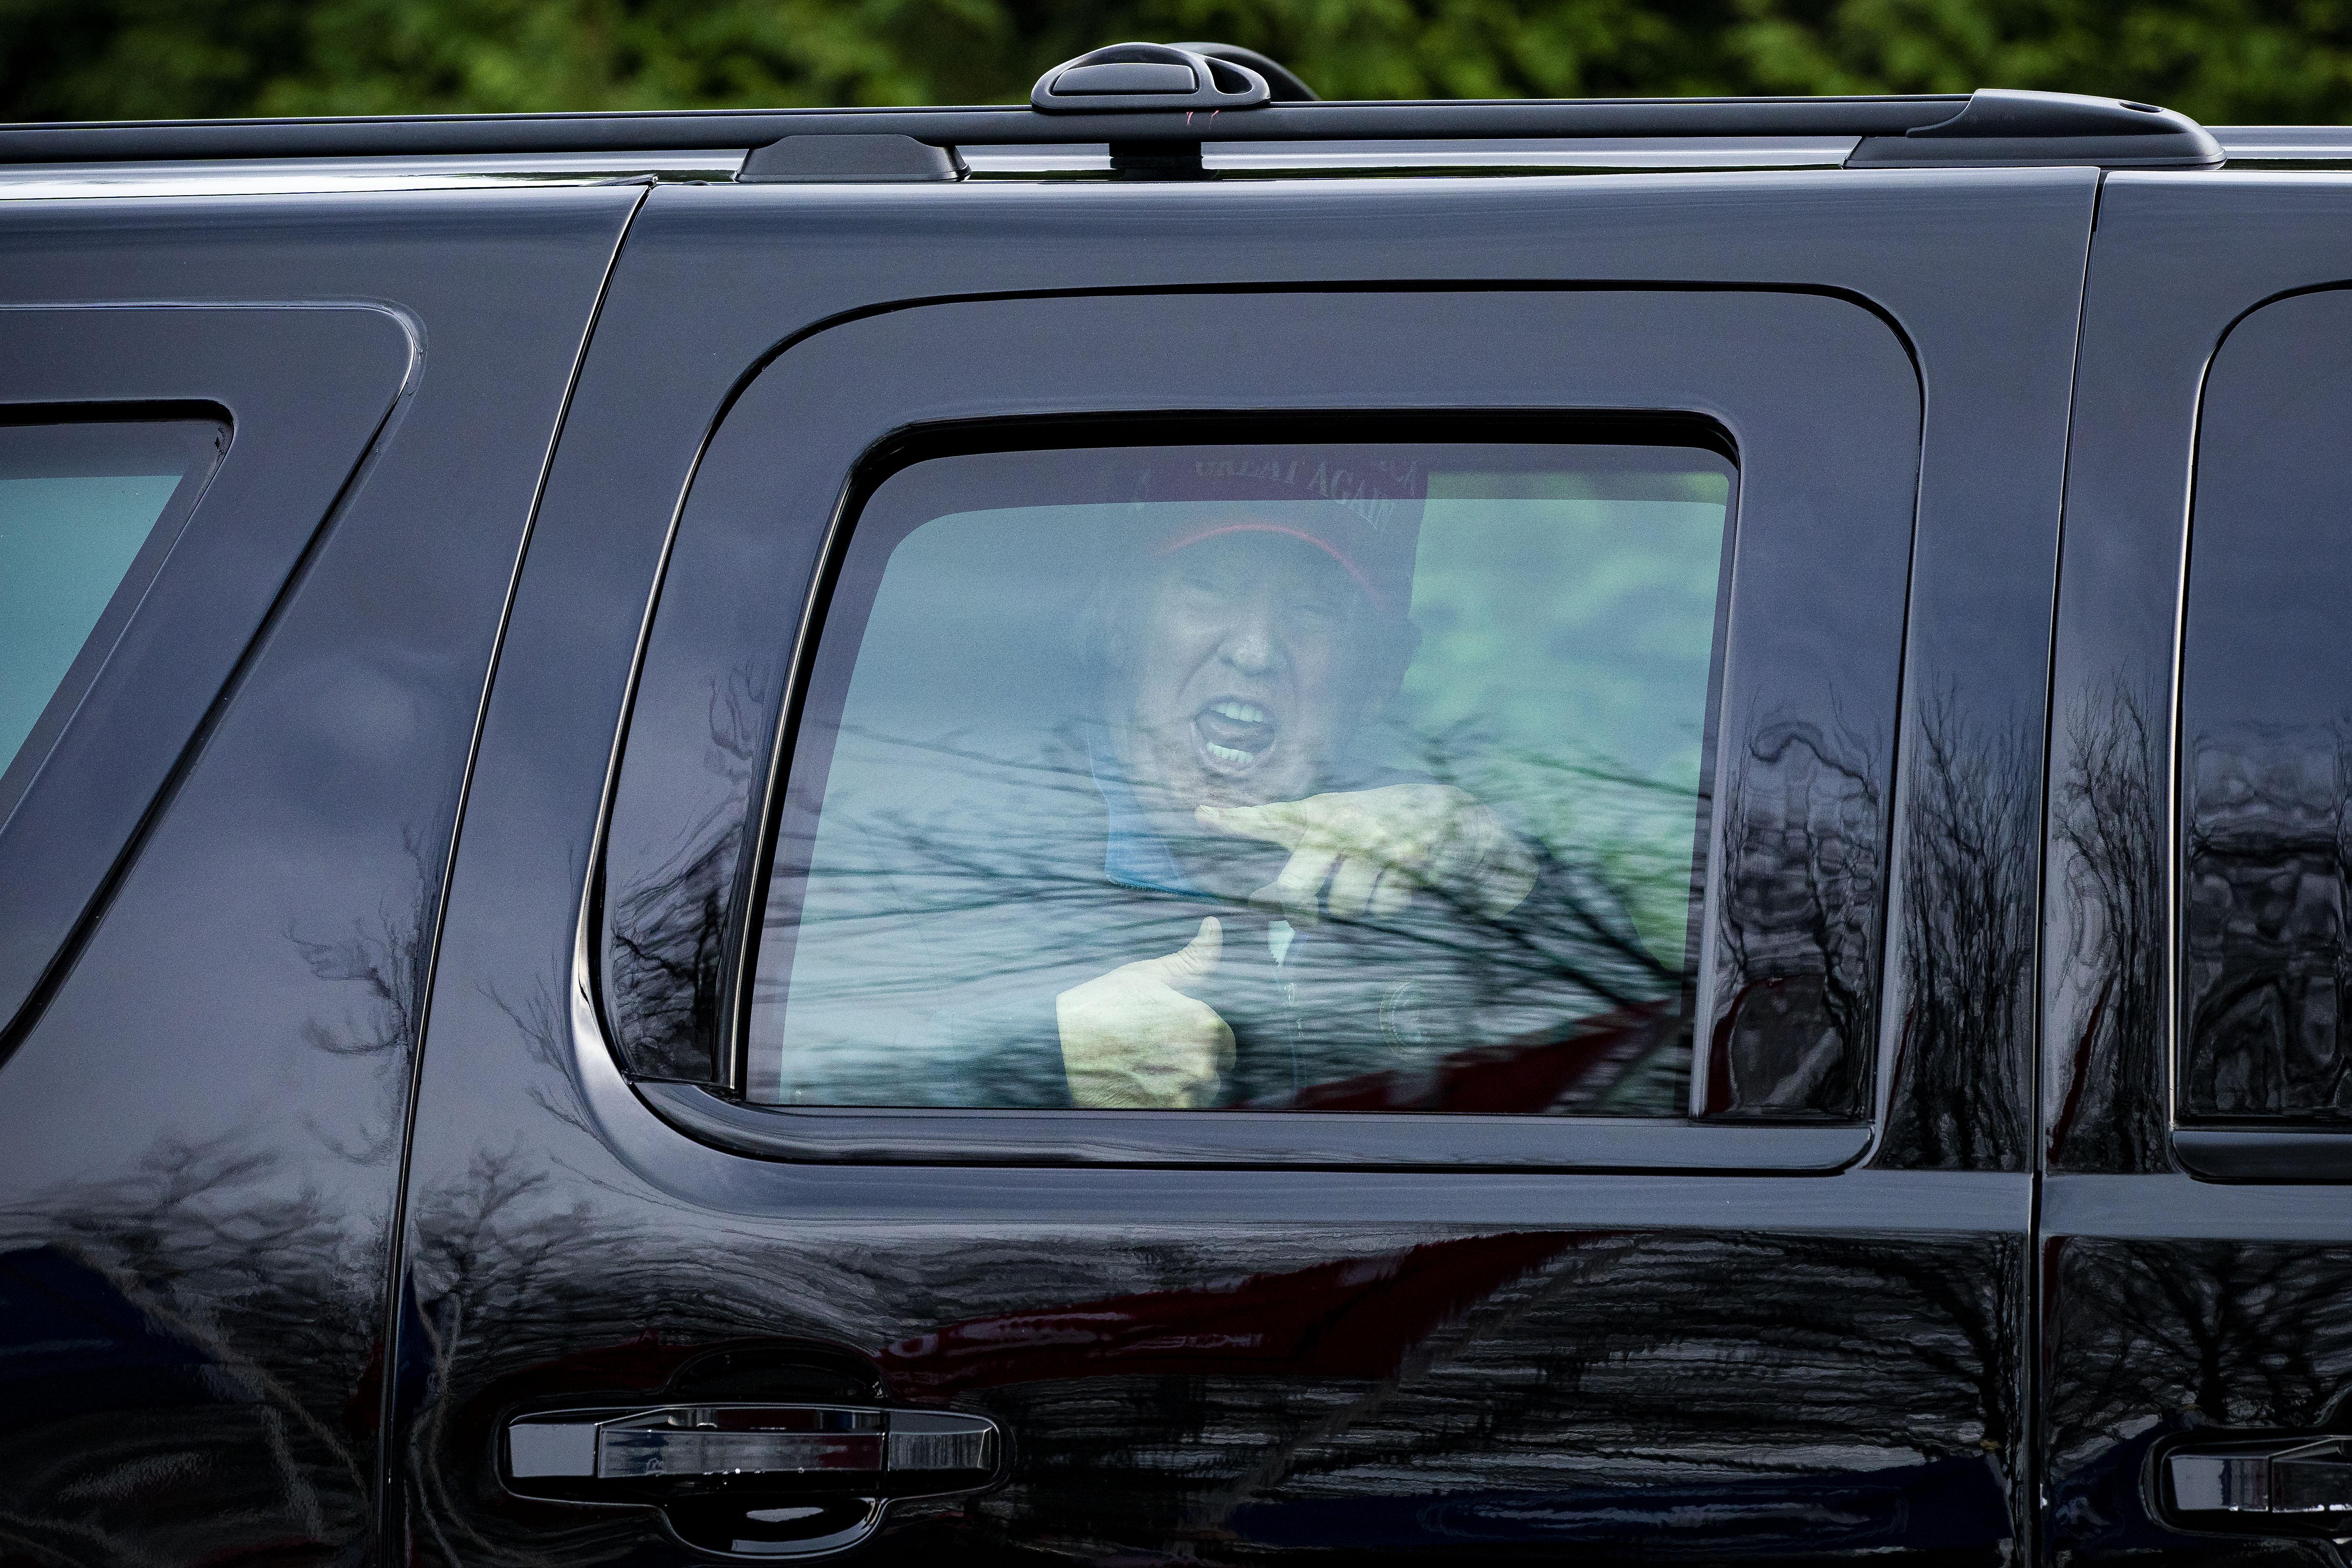 Donald Trump giving an enthusiastic thumbs up through the window of his motorcade.